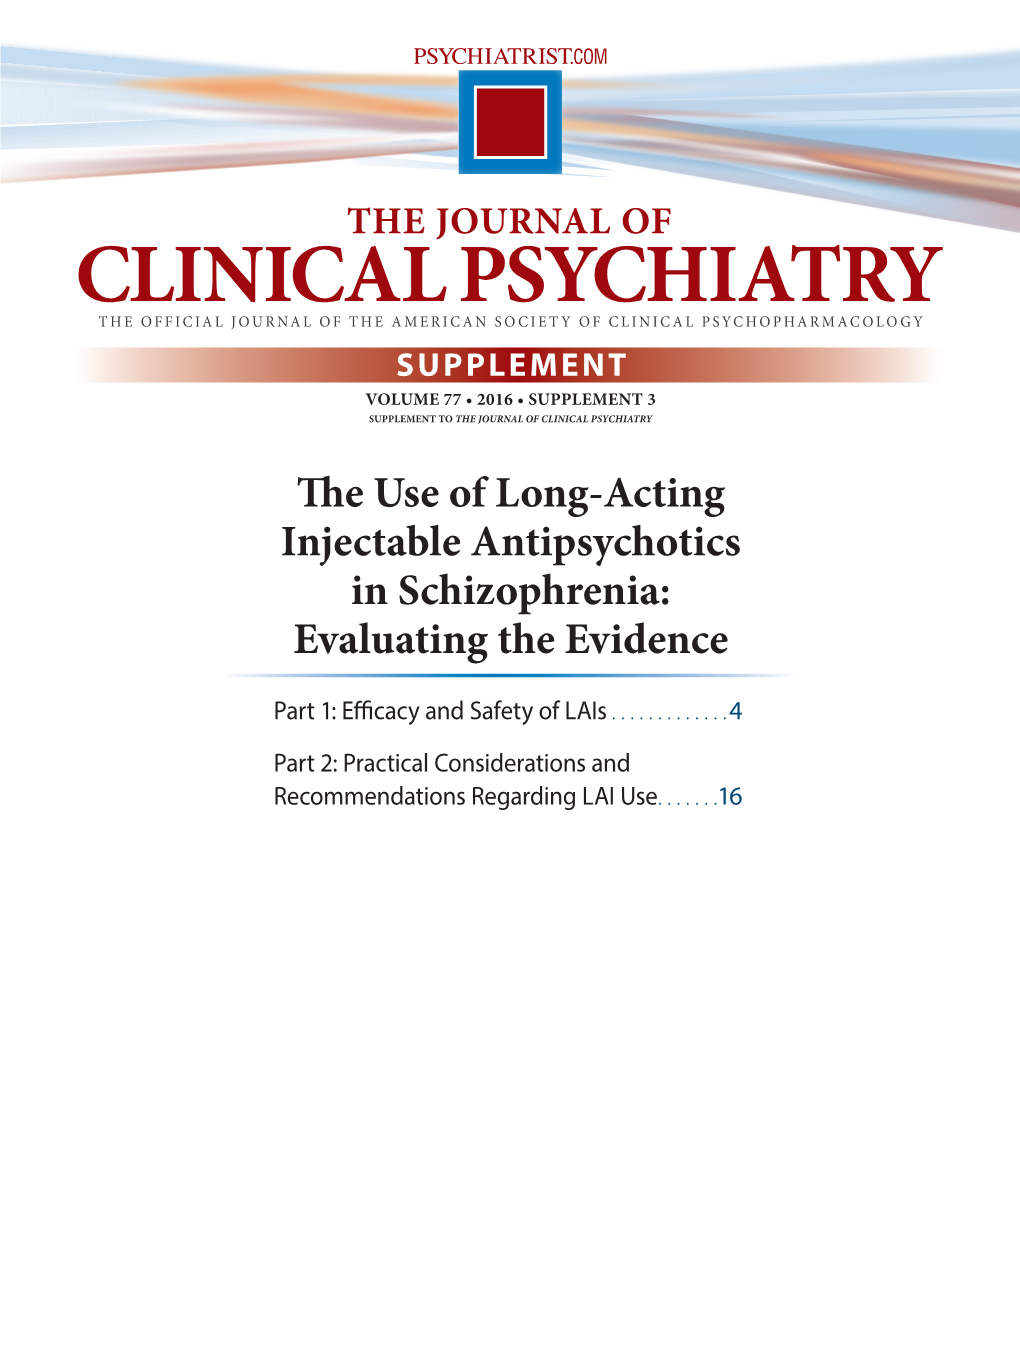 The Use of Long-Acting Injectable Antipsychotics in Schizophrenia: Evaluating the Evidence